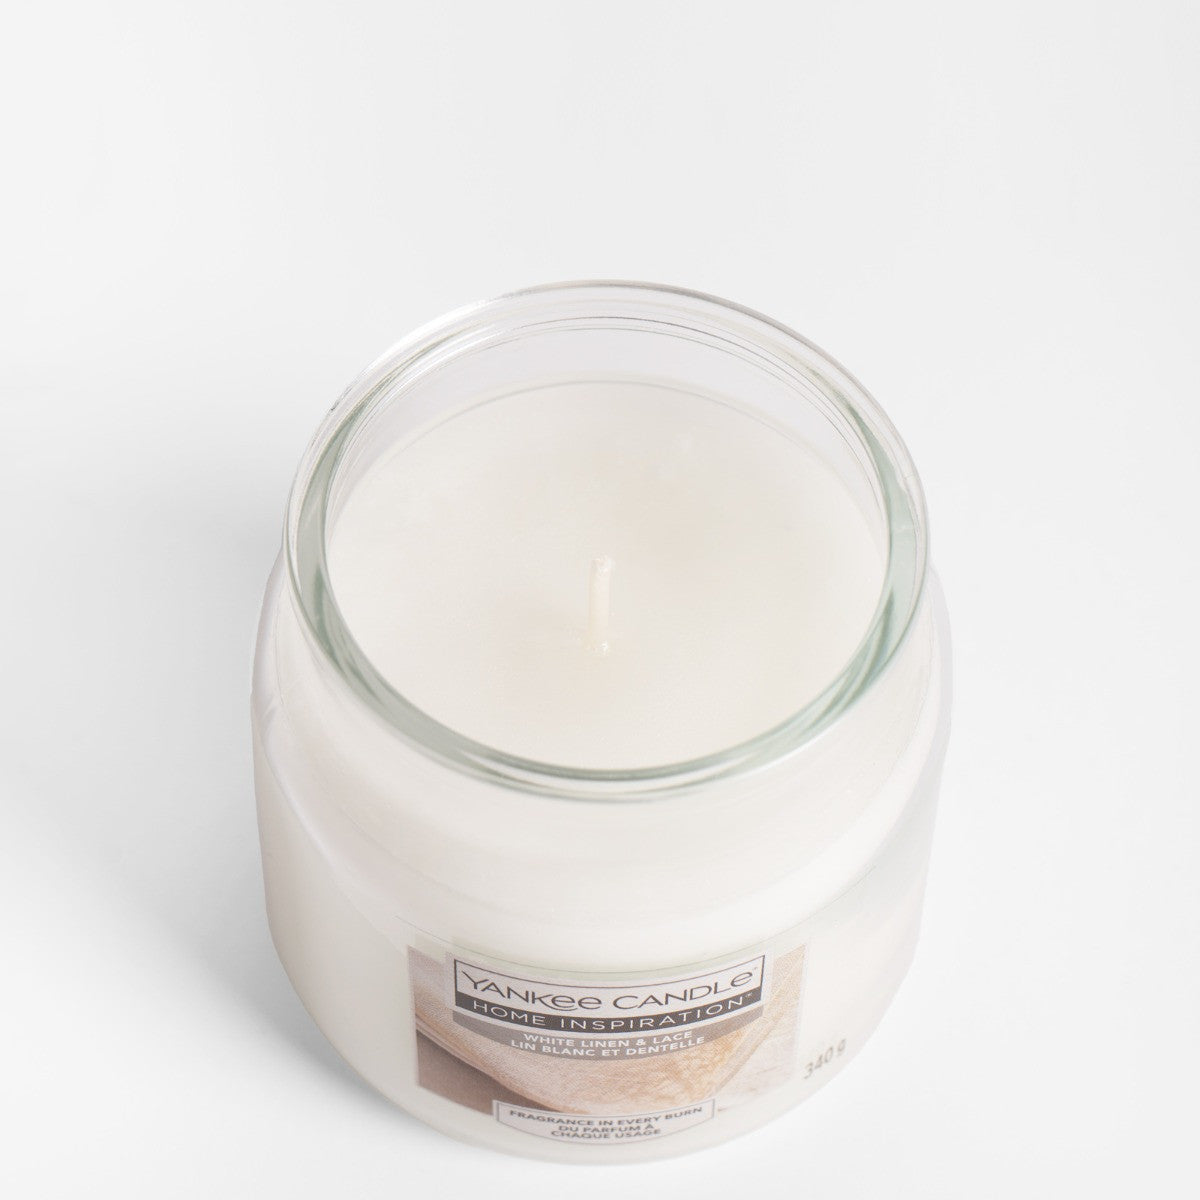 White Linen & Lace Medium Jar This elegant fragrance by Yankee Candle® Home Inspiration® features top notes of ozonic breeze, apple blossom, and raspberry leaf.